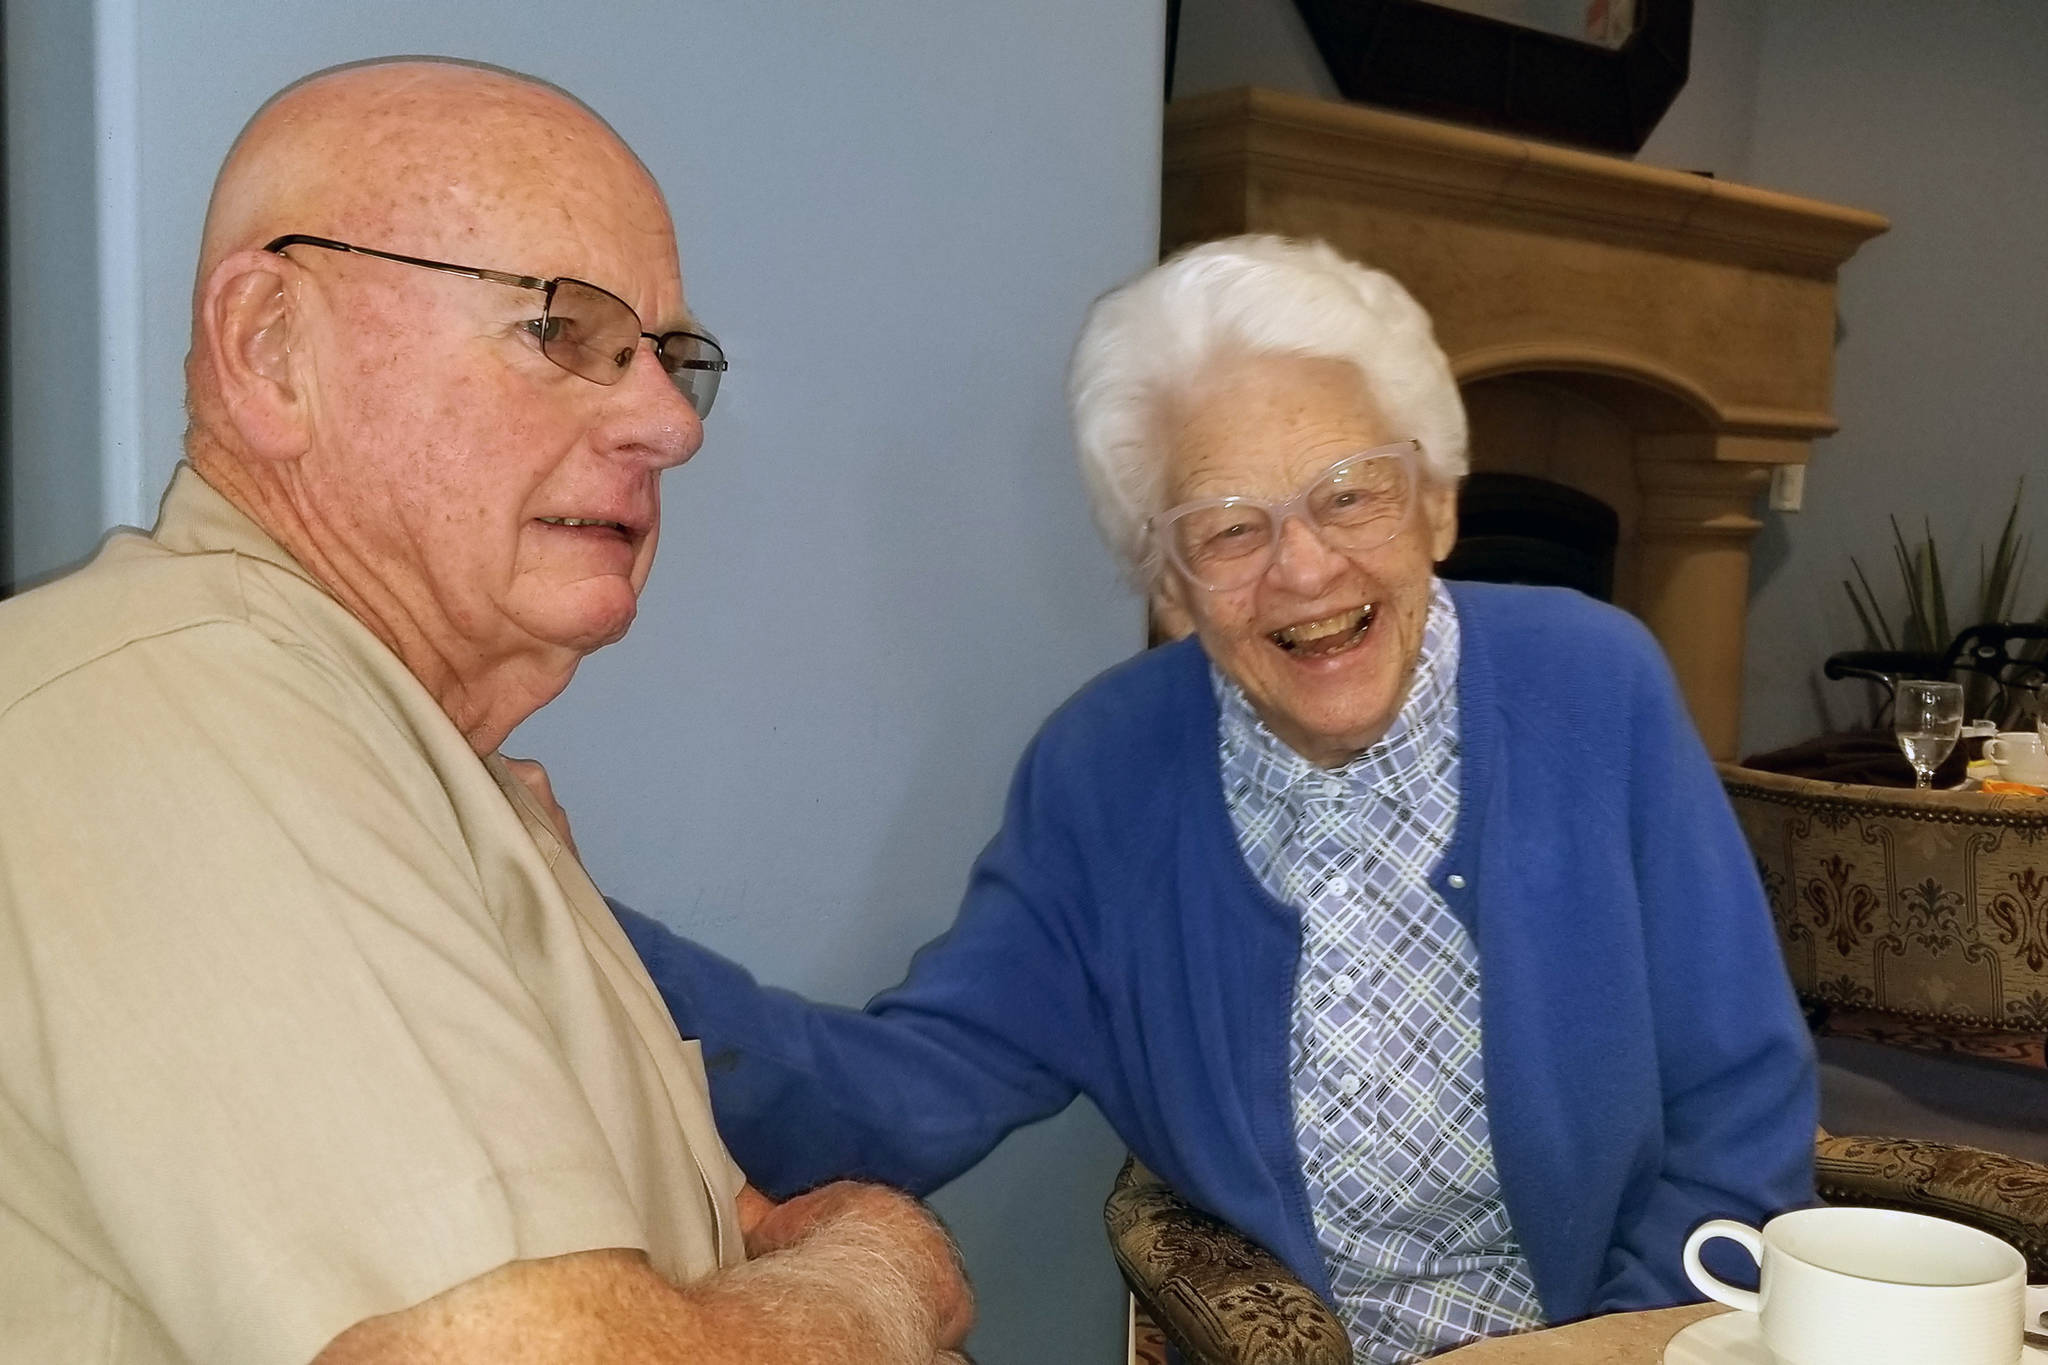 Nancy Livingston Stratford, right, laughs with Jim Wilson at her 100th birthday party in June 2019 at her home in Carlsbad, California. (Courtesy Photo | Dot Wilson)